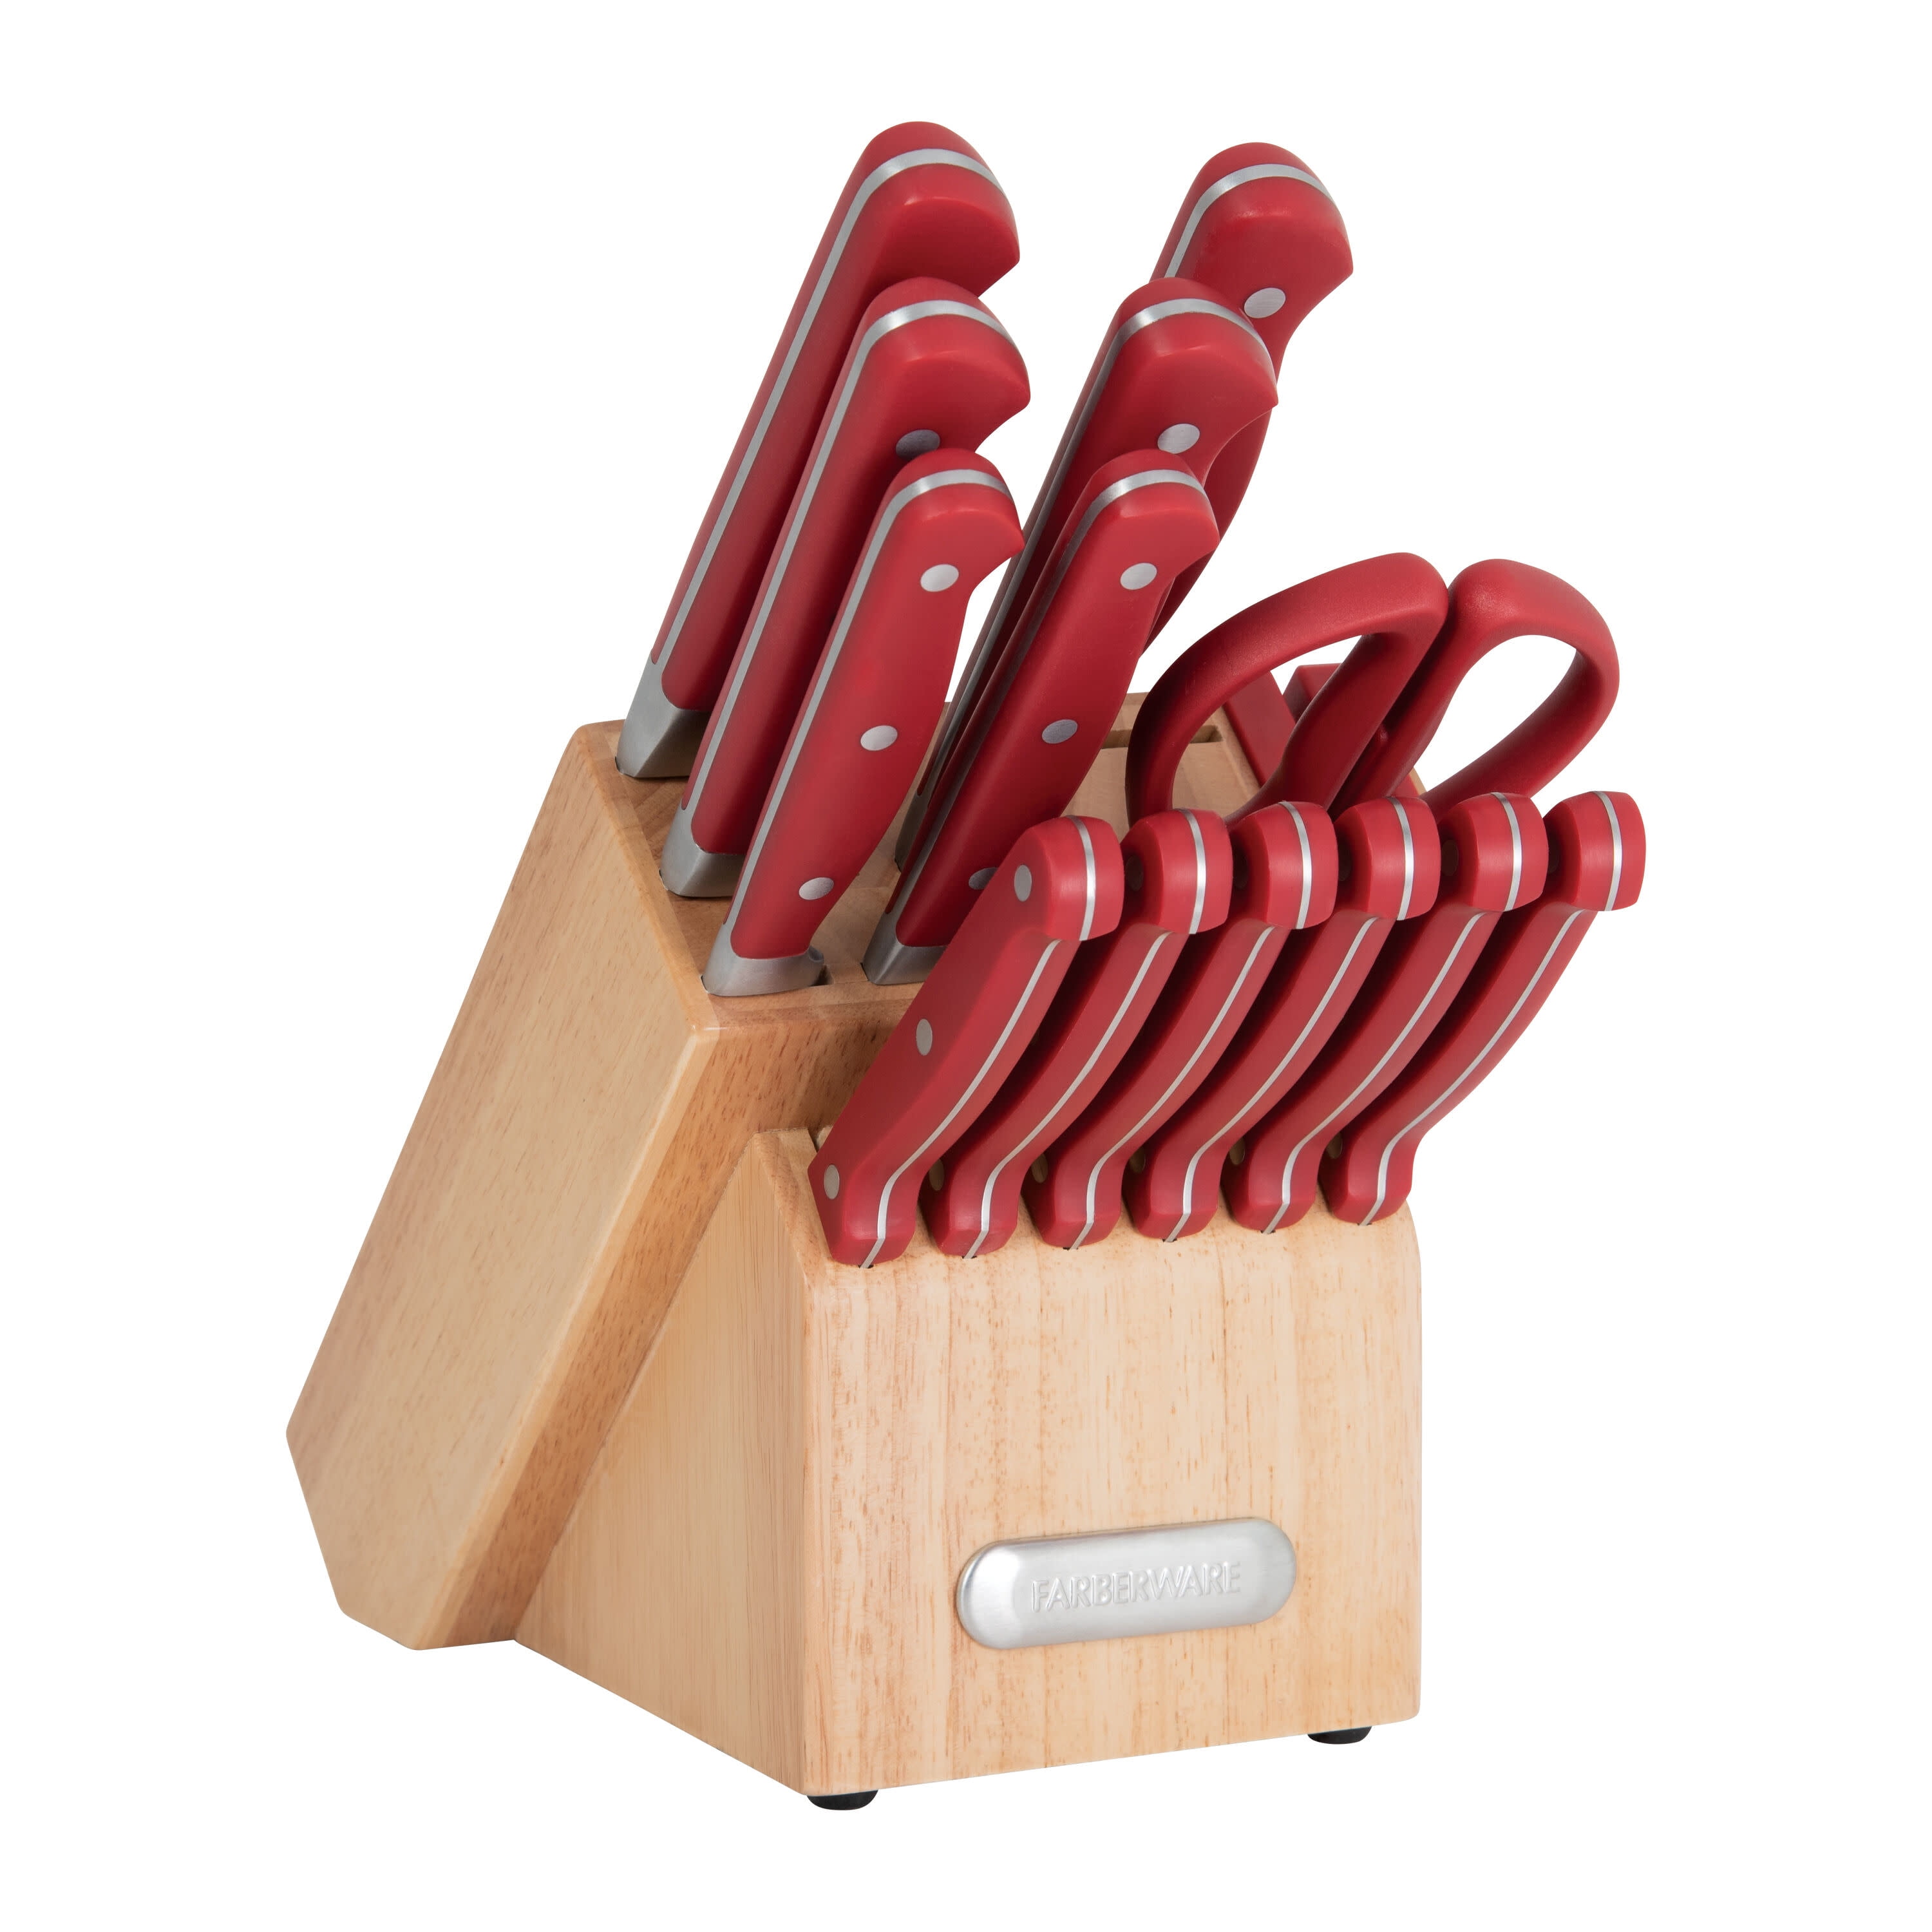 3 Knife Set with a Red Granite Handle, a Garnet Colored Cubic